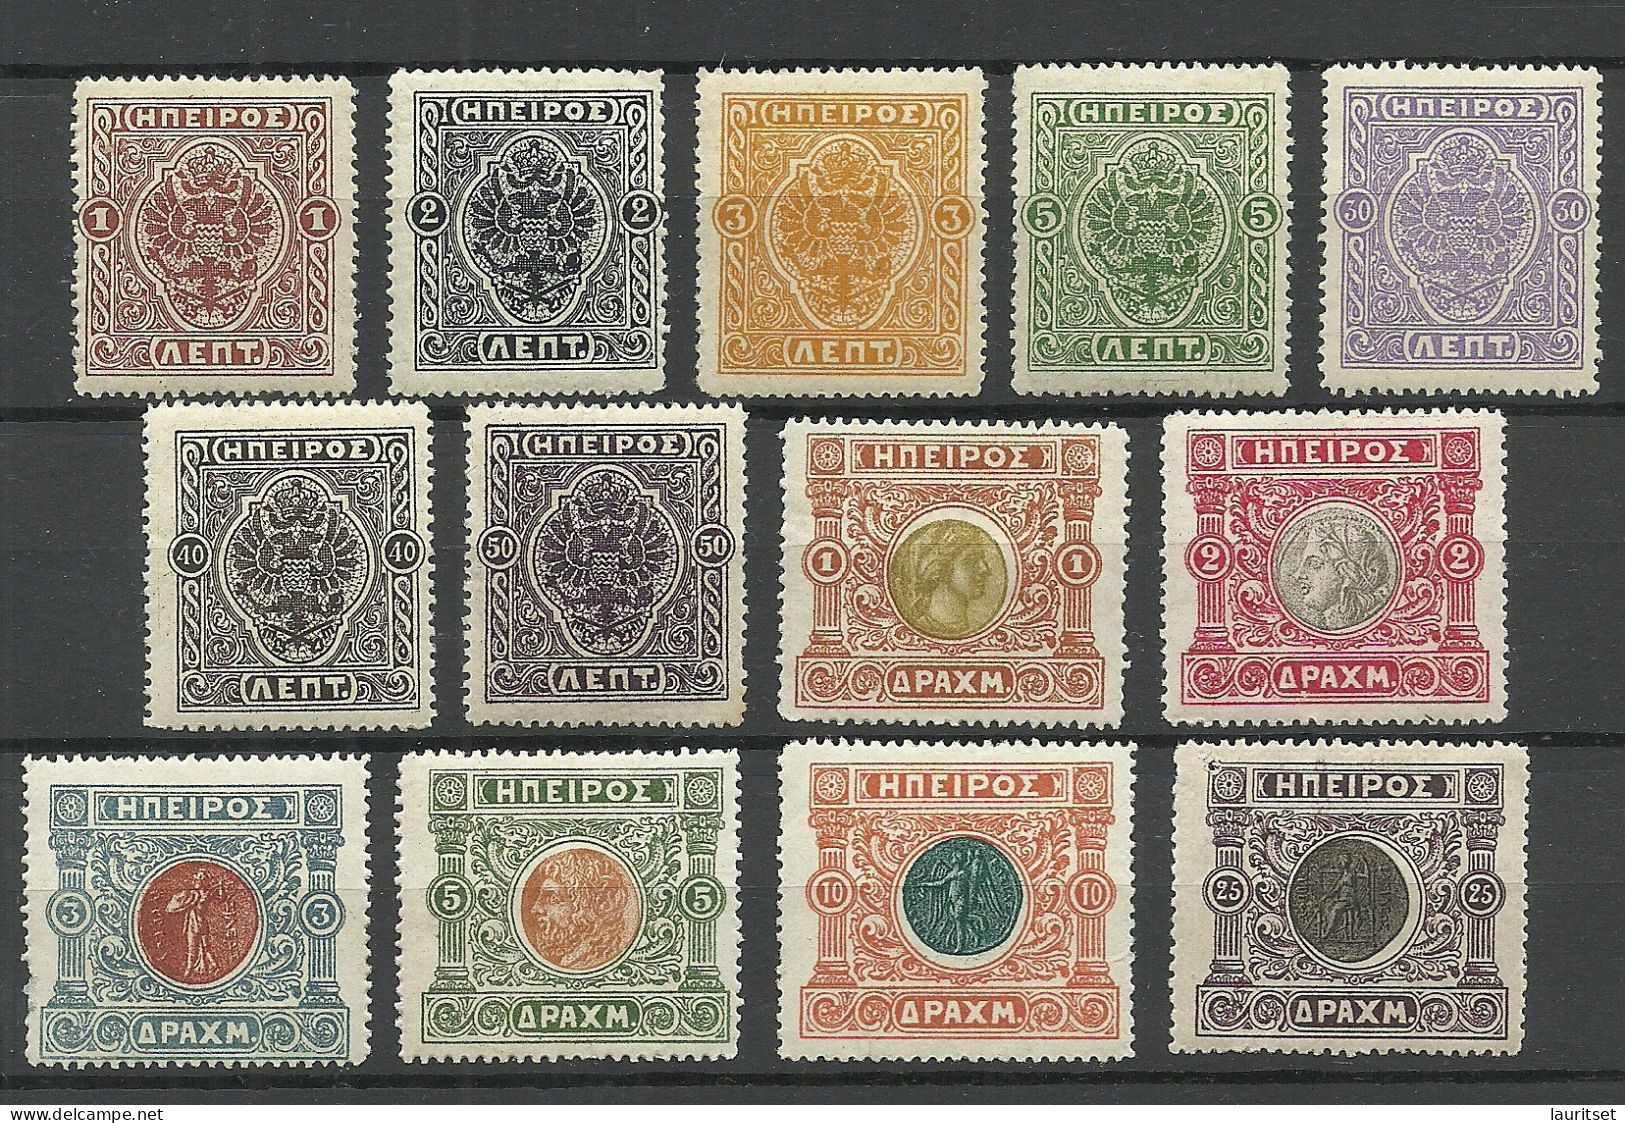 EPIRUS Epeiros Greece 1920 Unofficial Issue MNH (1 Stamp Is MH/*) - Epiro Del Norte